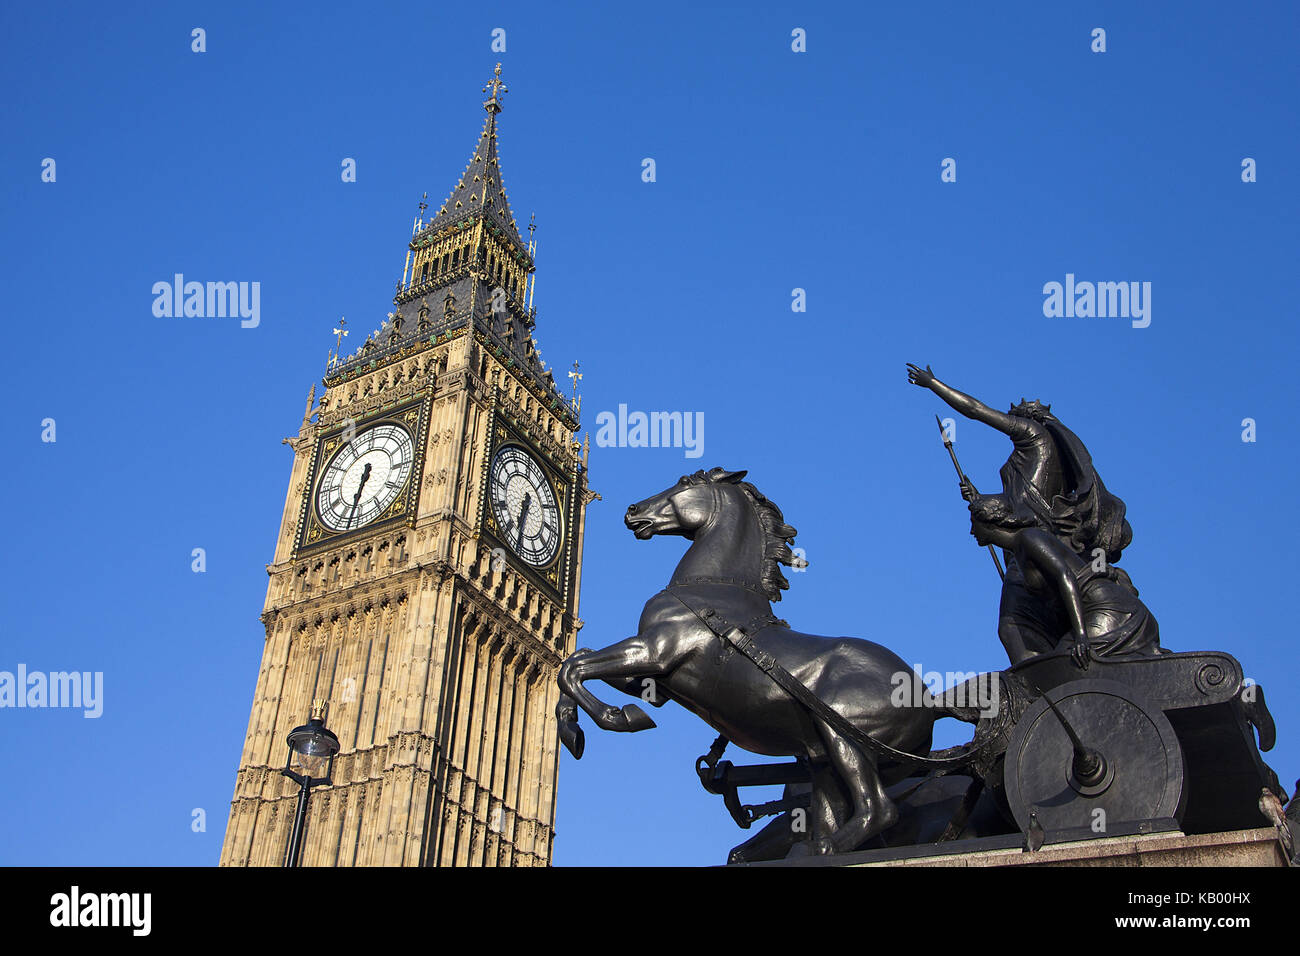 Great Britain, London, Westminster Palace, Houses of Parliament, monument, Big Ben, Stock Photo